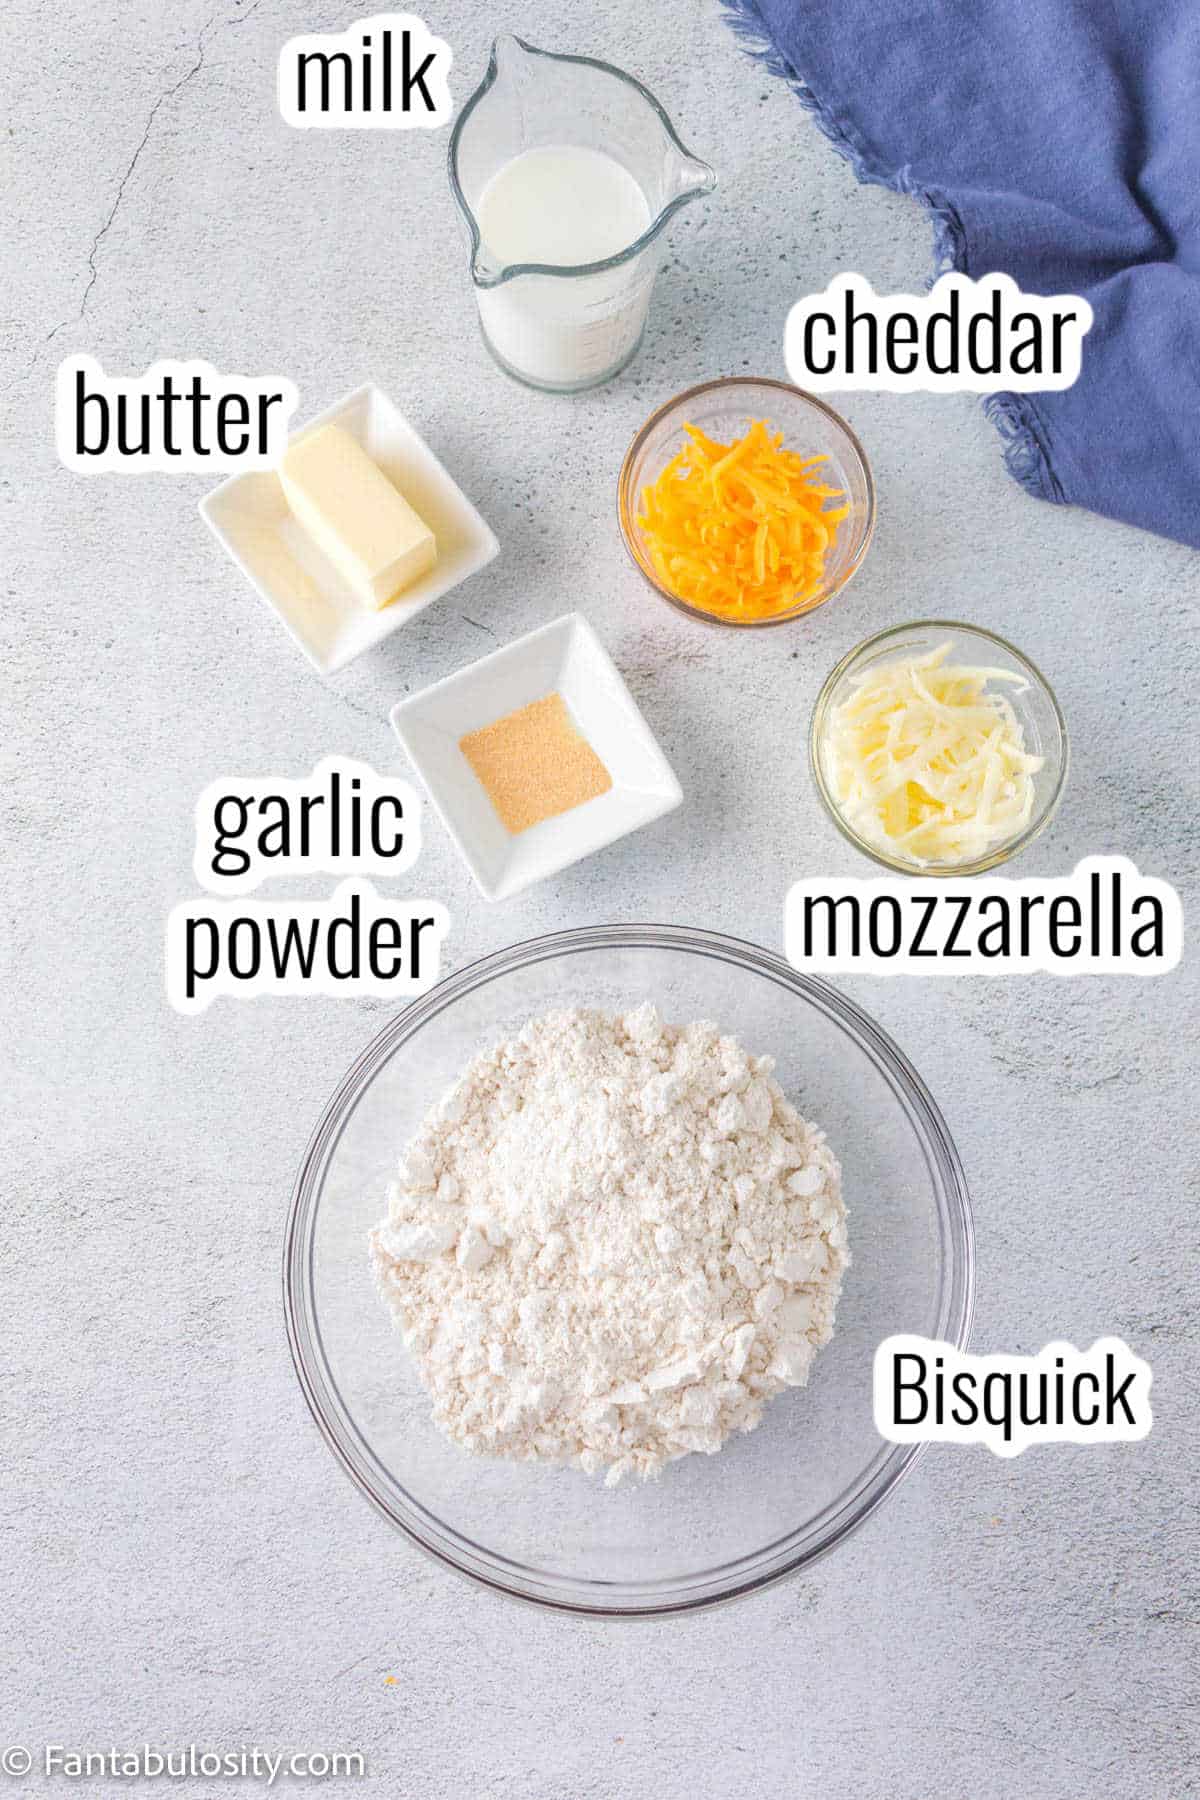 ingredients on table for cheddar biscuits